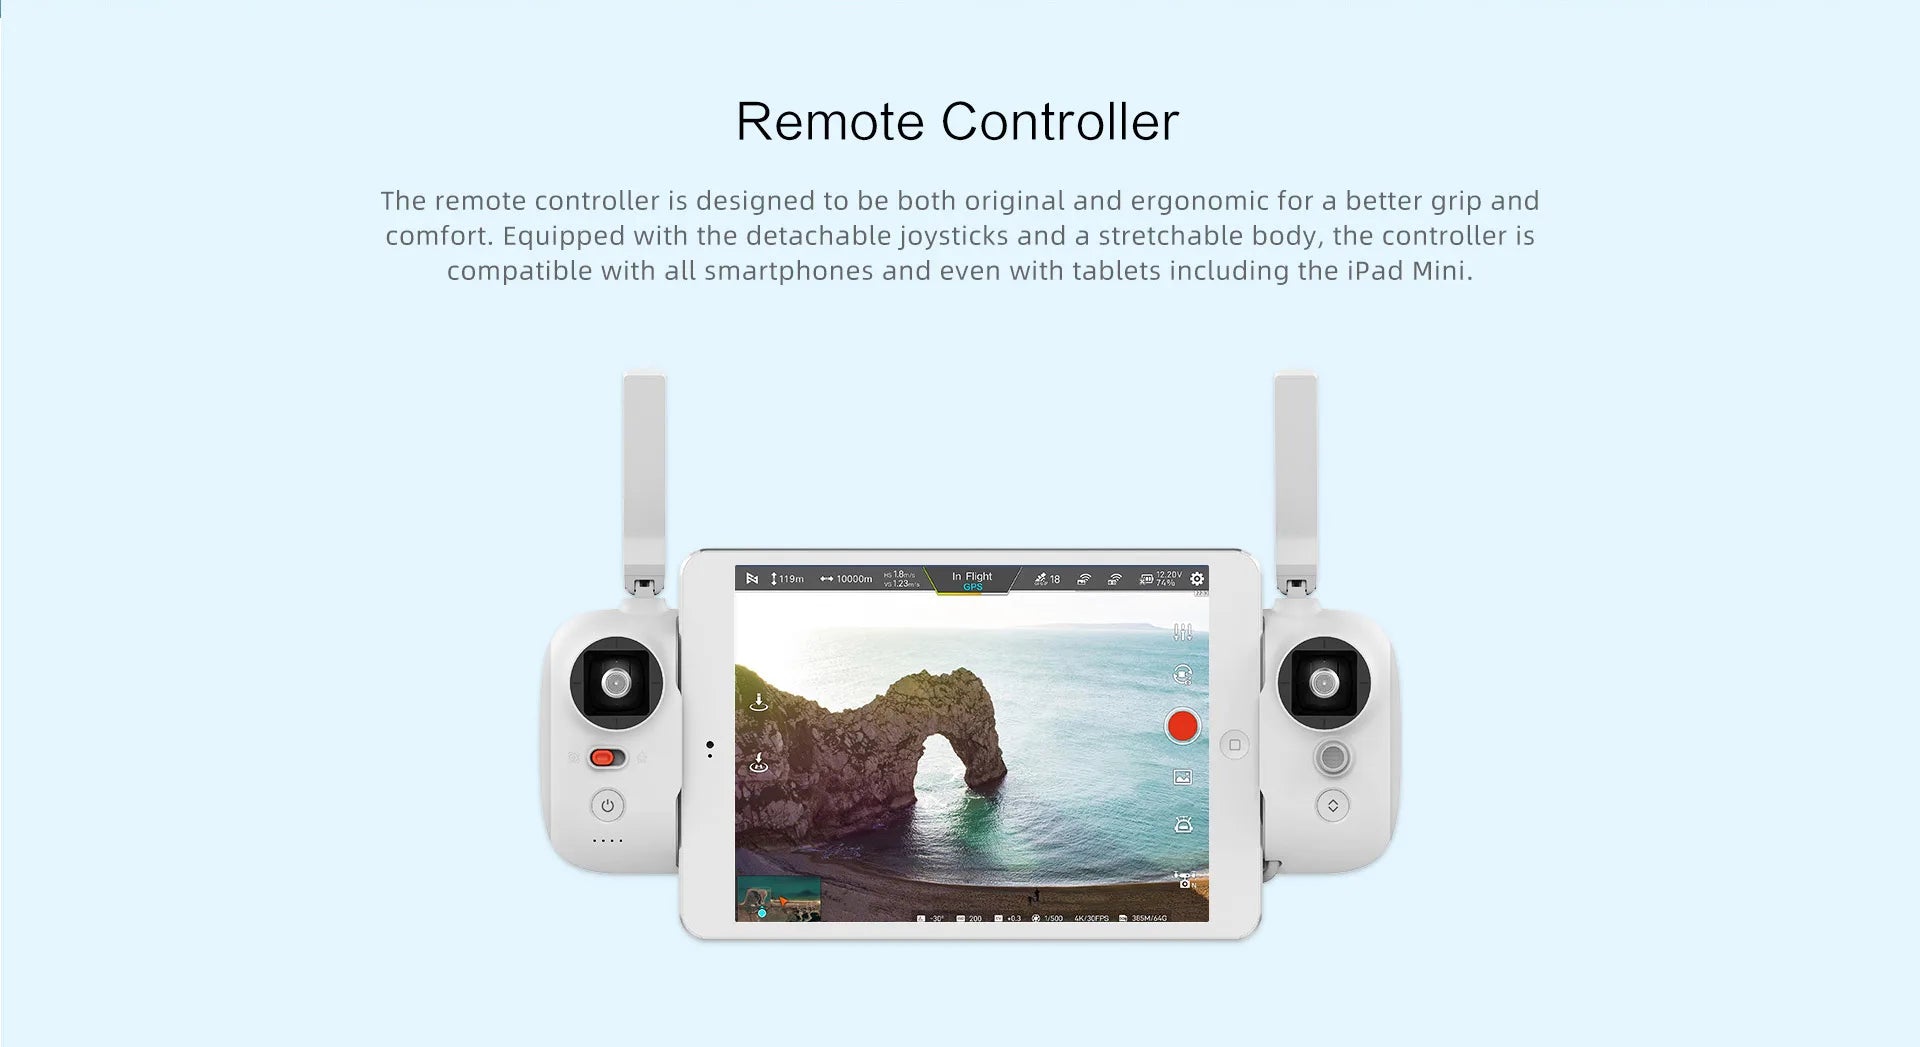 FIMI x8se 2022 V2 Camera Drone, the remote controller is designed to be both original and ergonomic for a better grip and comfort 